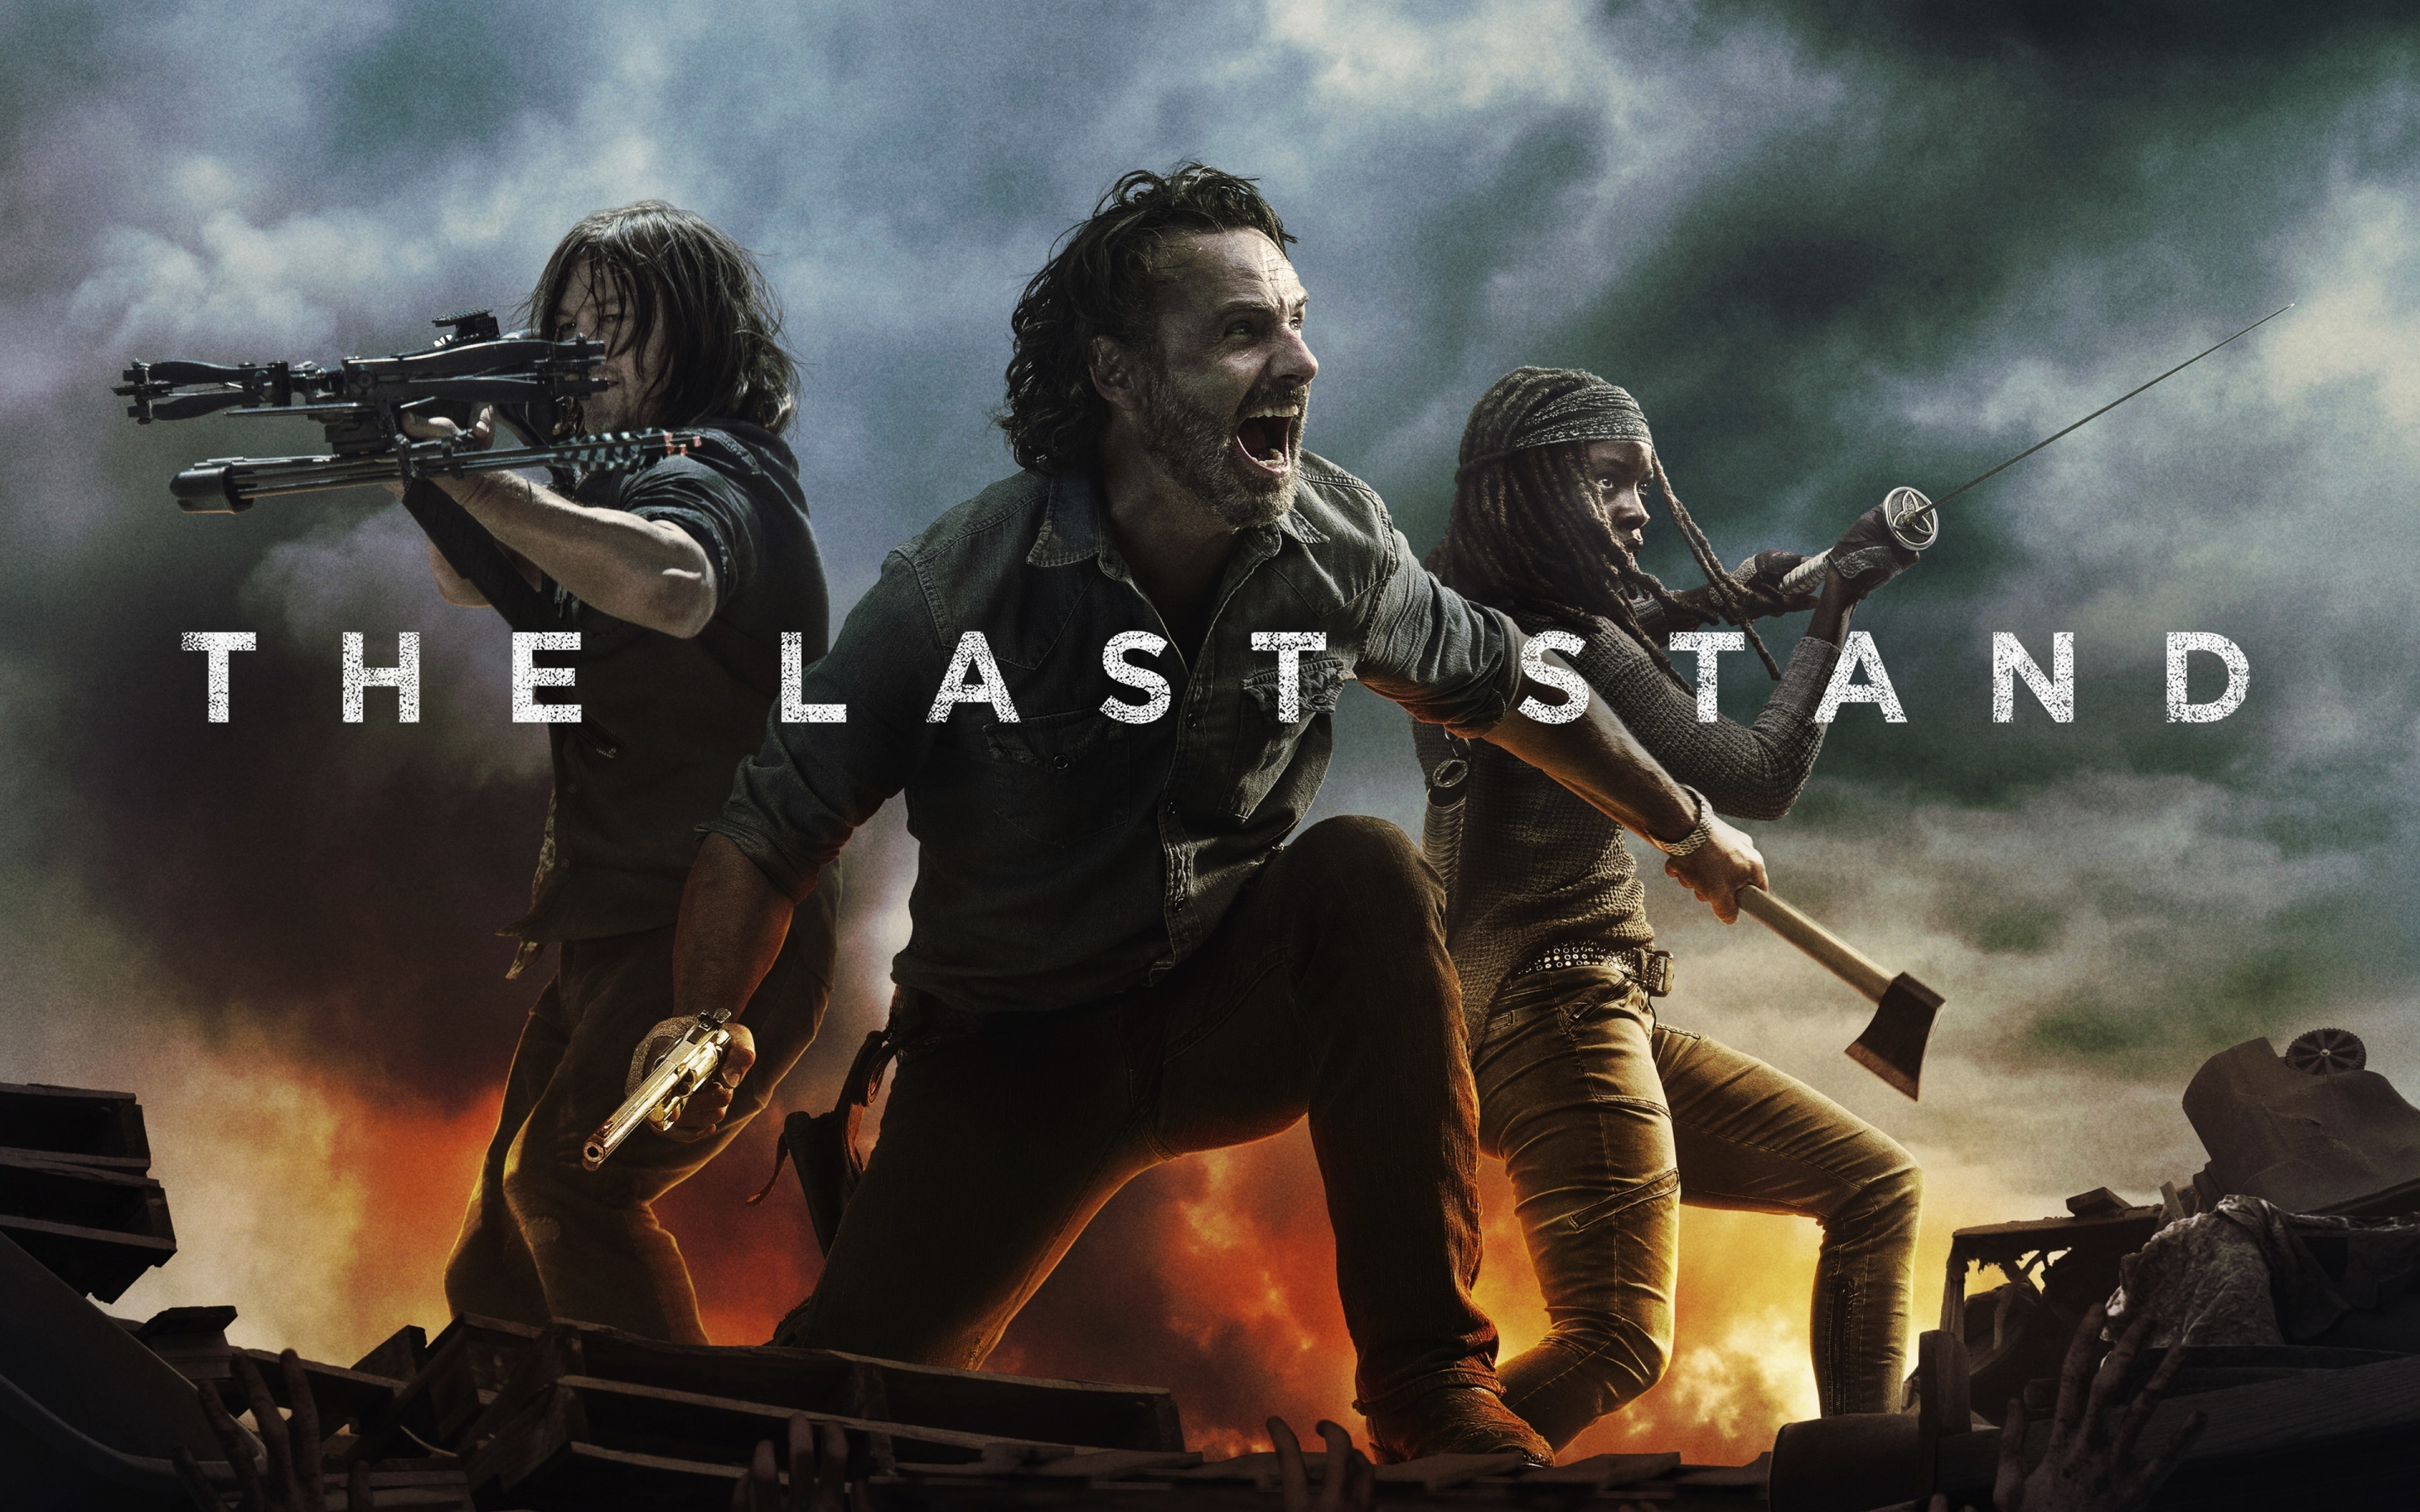 The walking dead, the last stand, tv show, 2018, 2880x1800 wallpaper